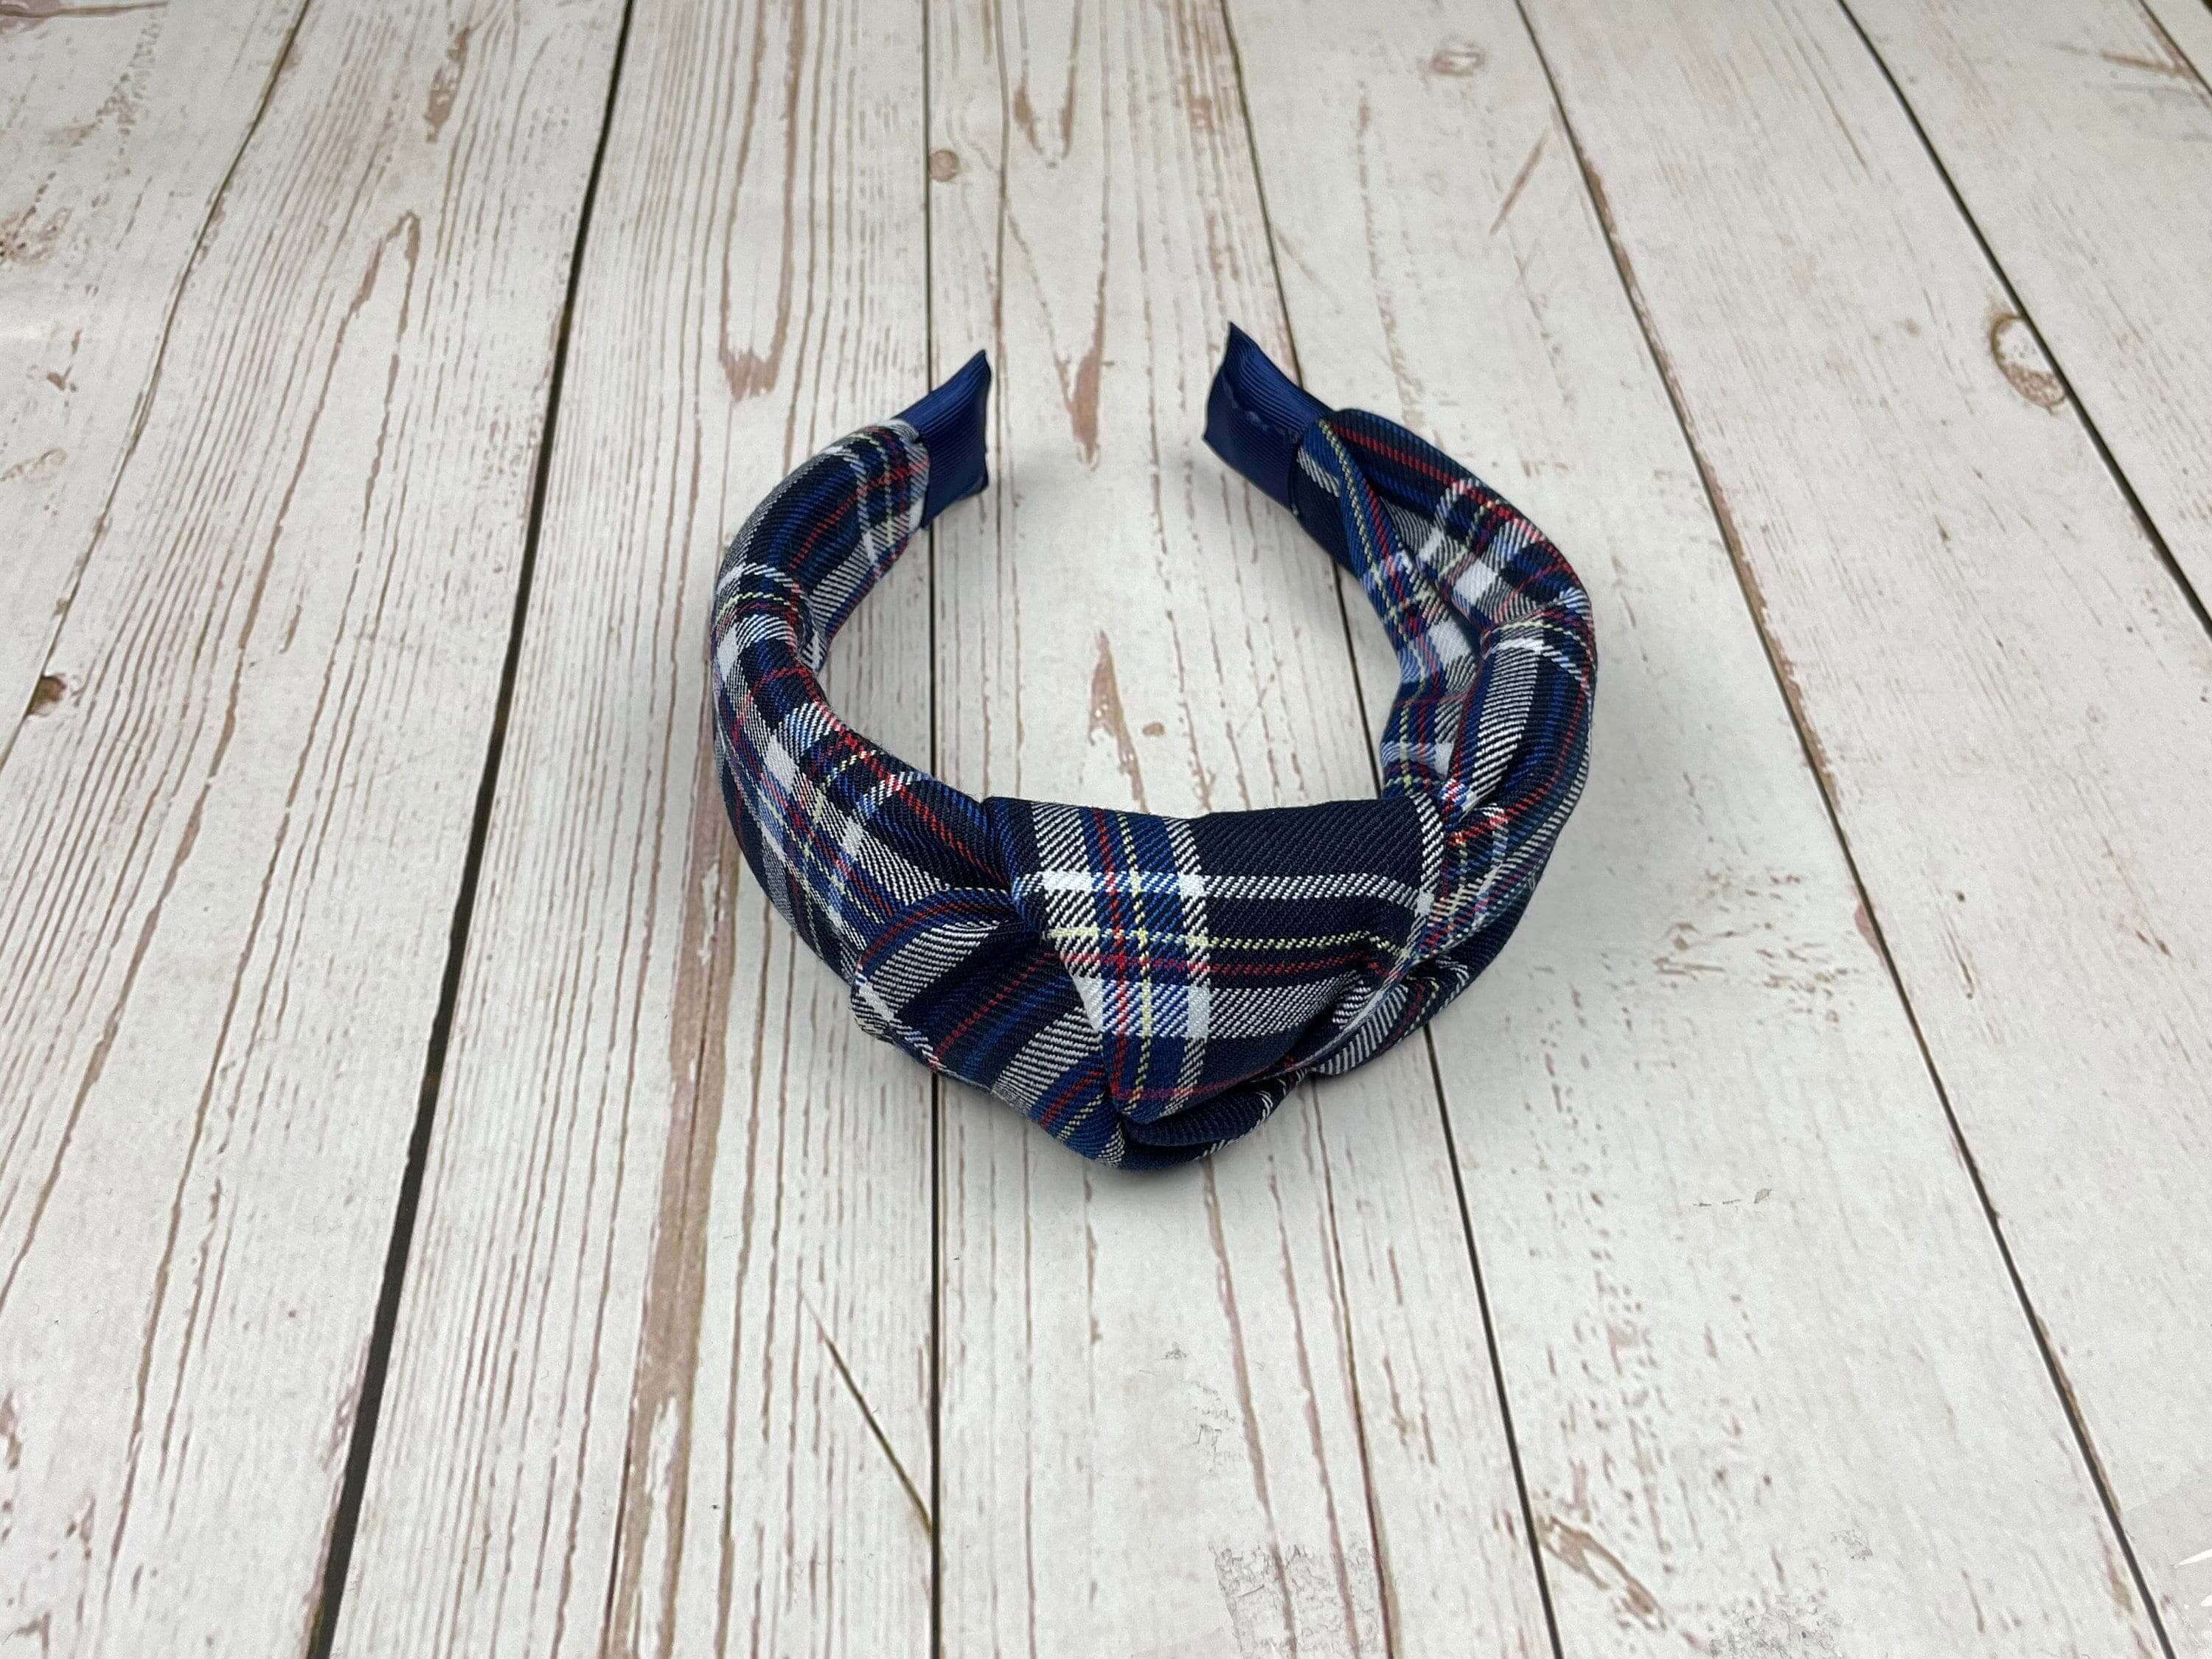 Get your hands on this adorable and stylish plaid pattern headband. It is the perfect accessory for autumn and will help you add a pop of color to your outfit.